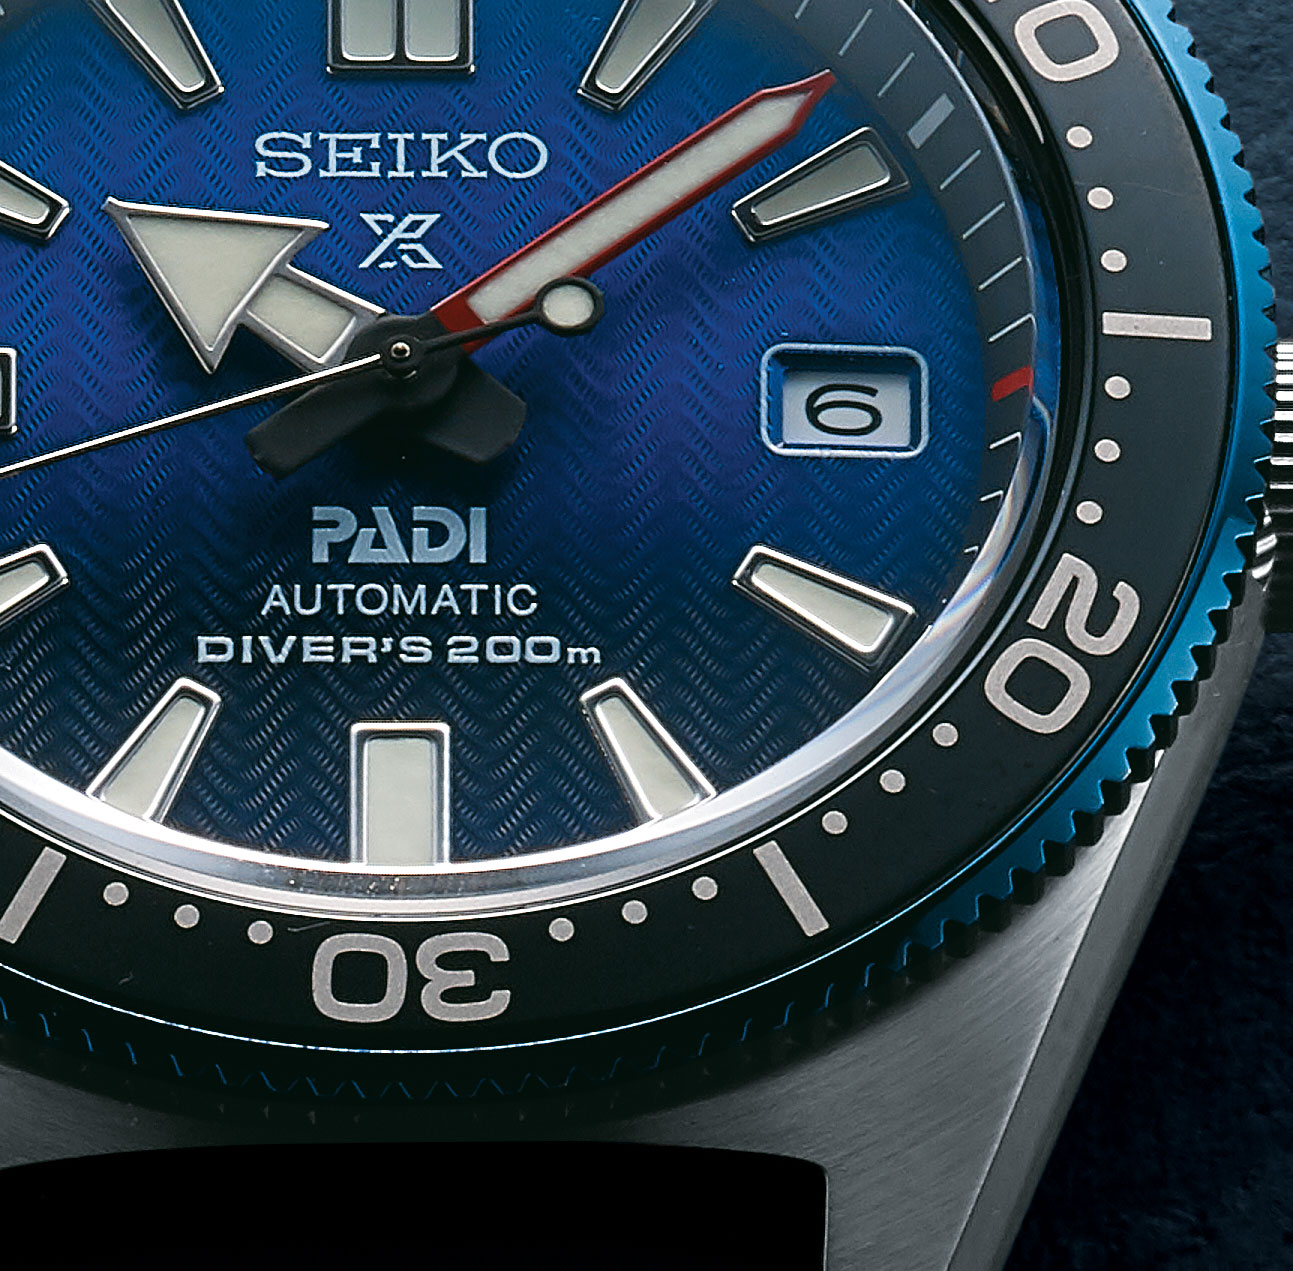 Seiko Introduces the PADI Special Edition Diver “62MAS” | SJX Watches